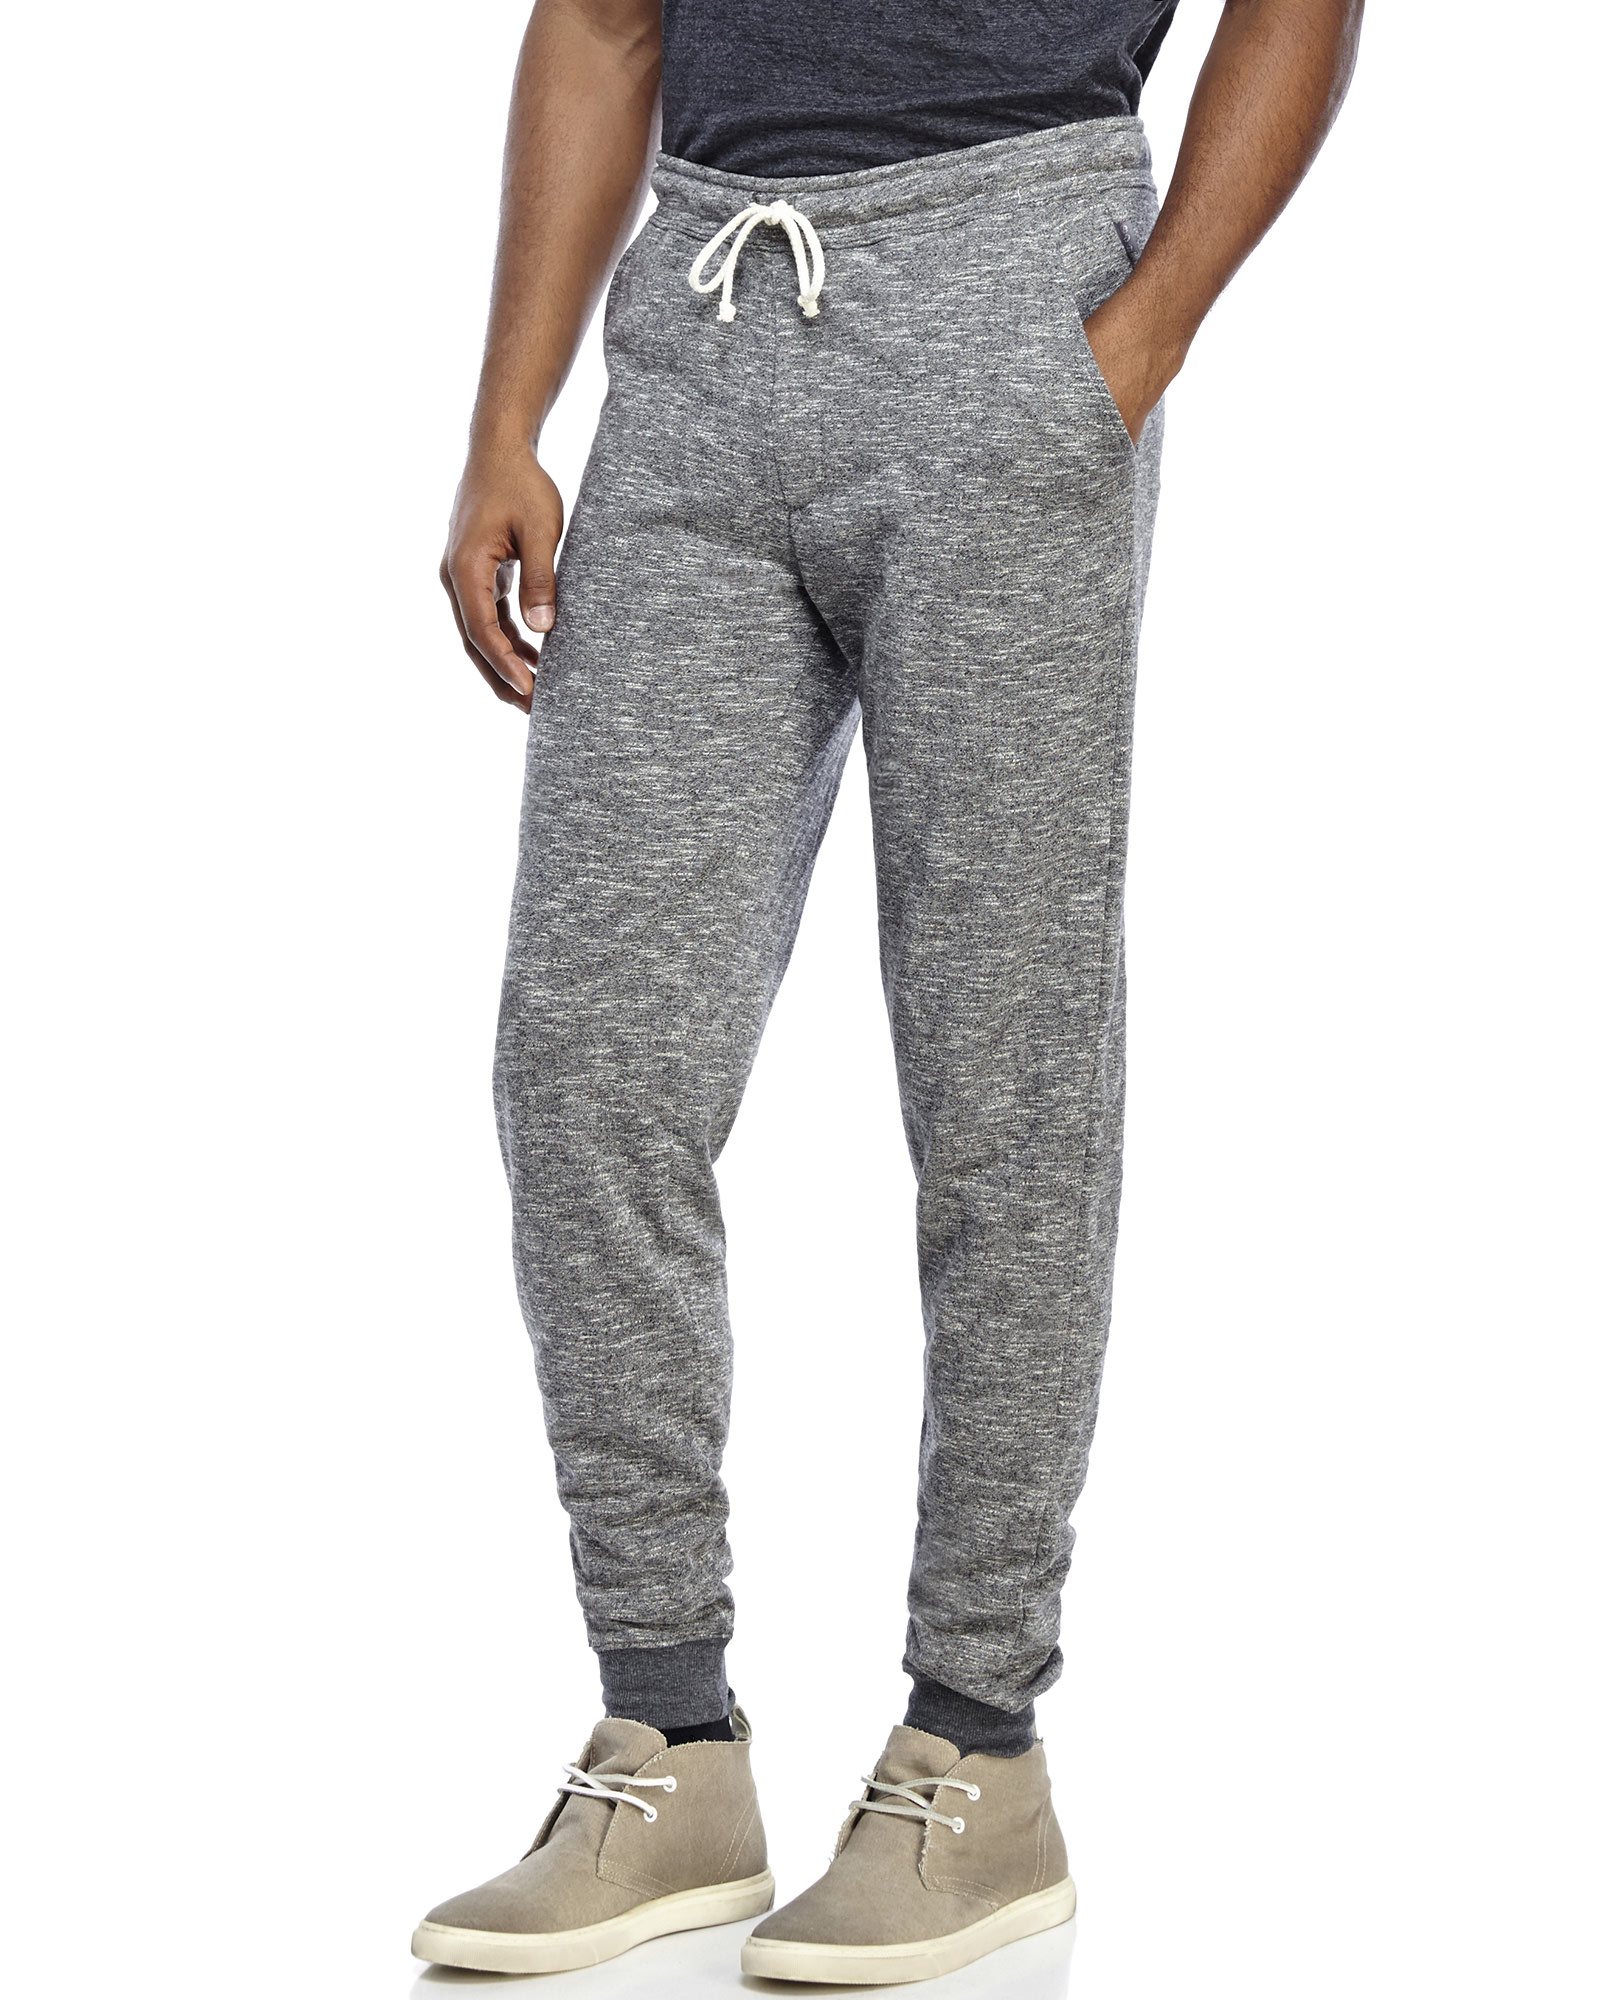 Lyst - Threads For Thought Grey Melange Jogger Pants in Gray for Men